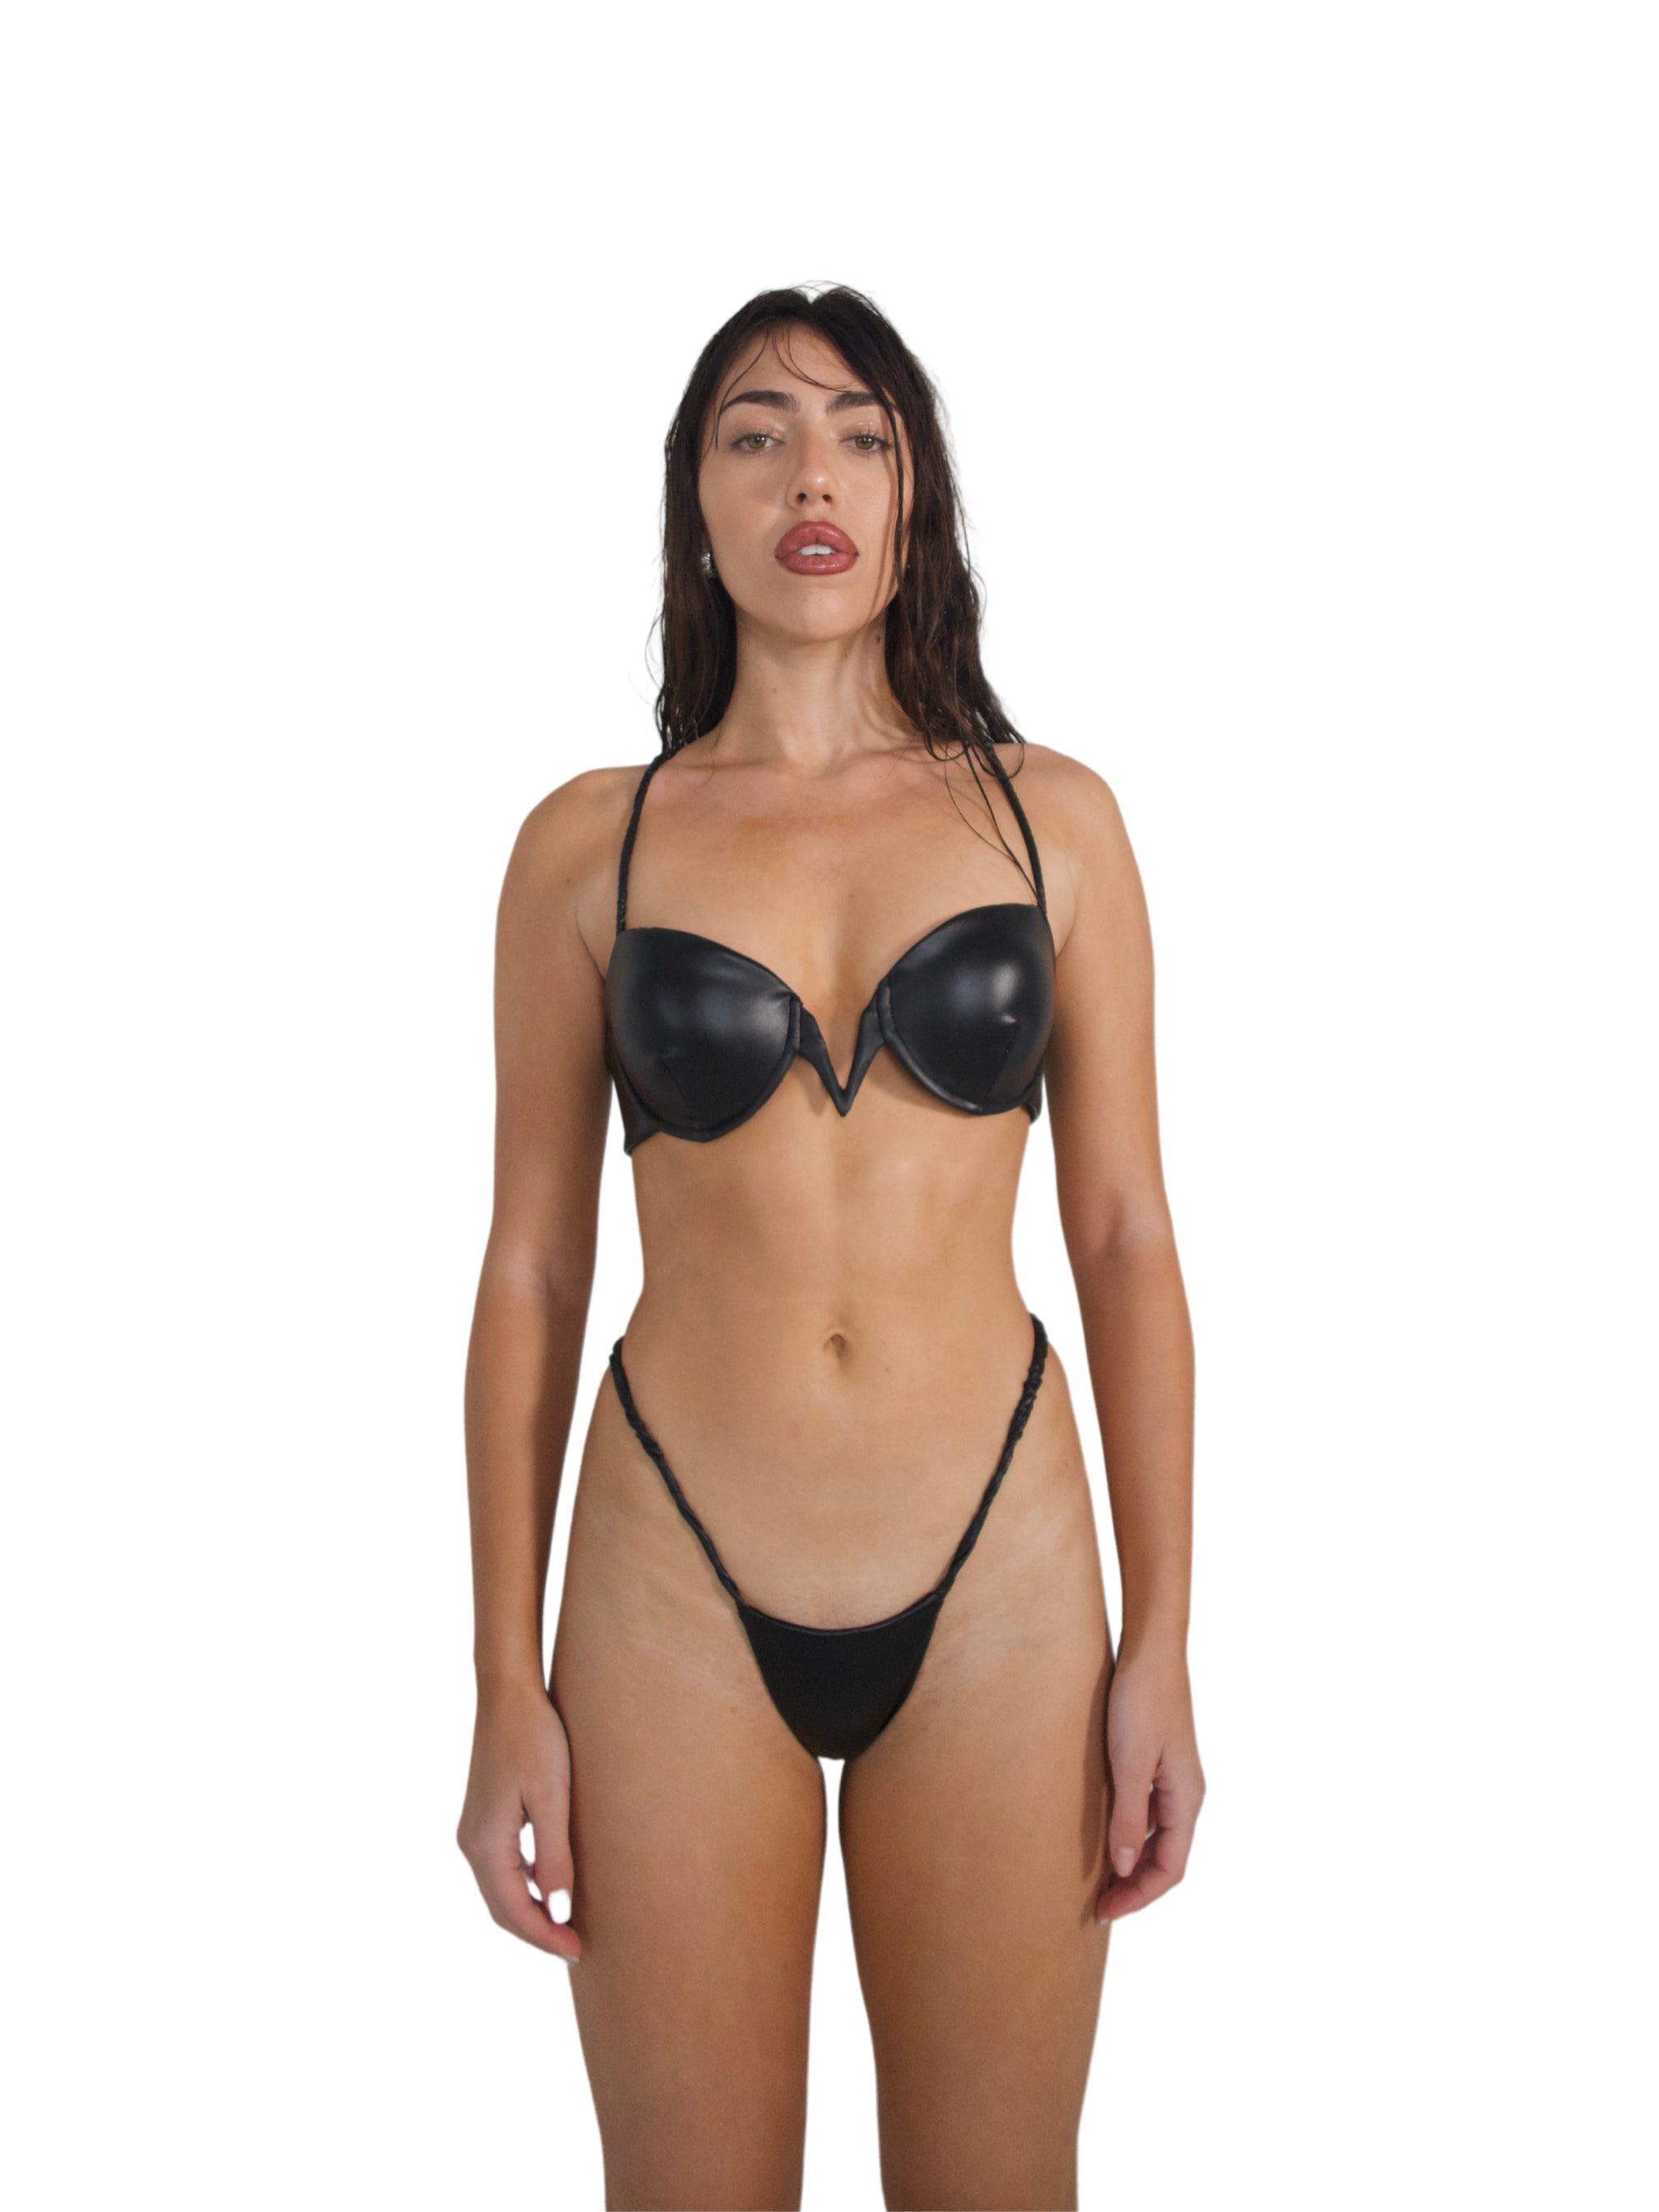 LEATHER CREST THONG - SIREN THE BRAND